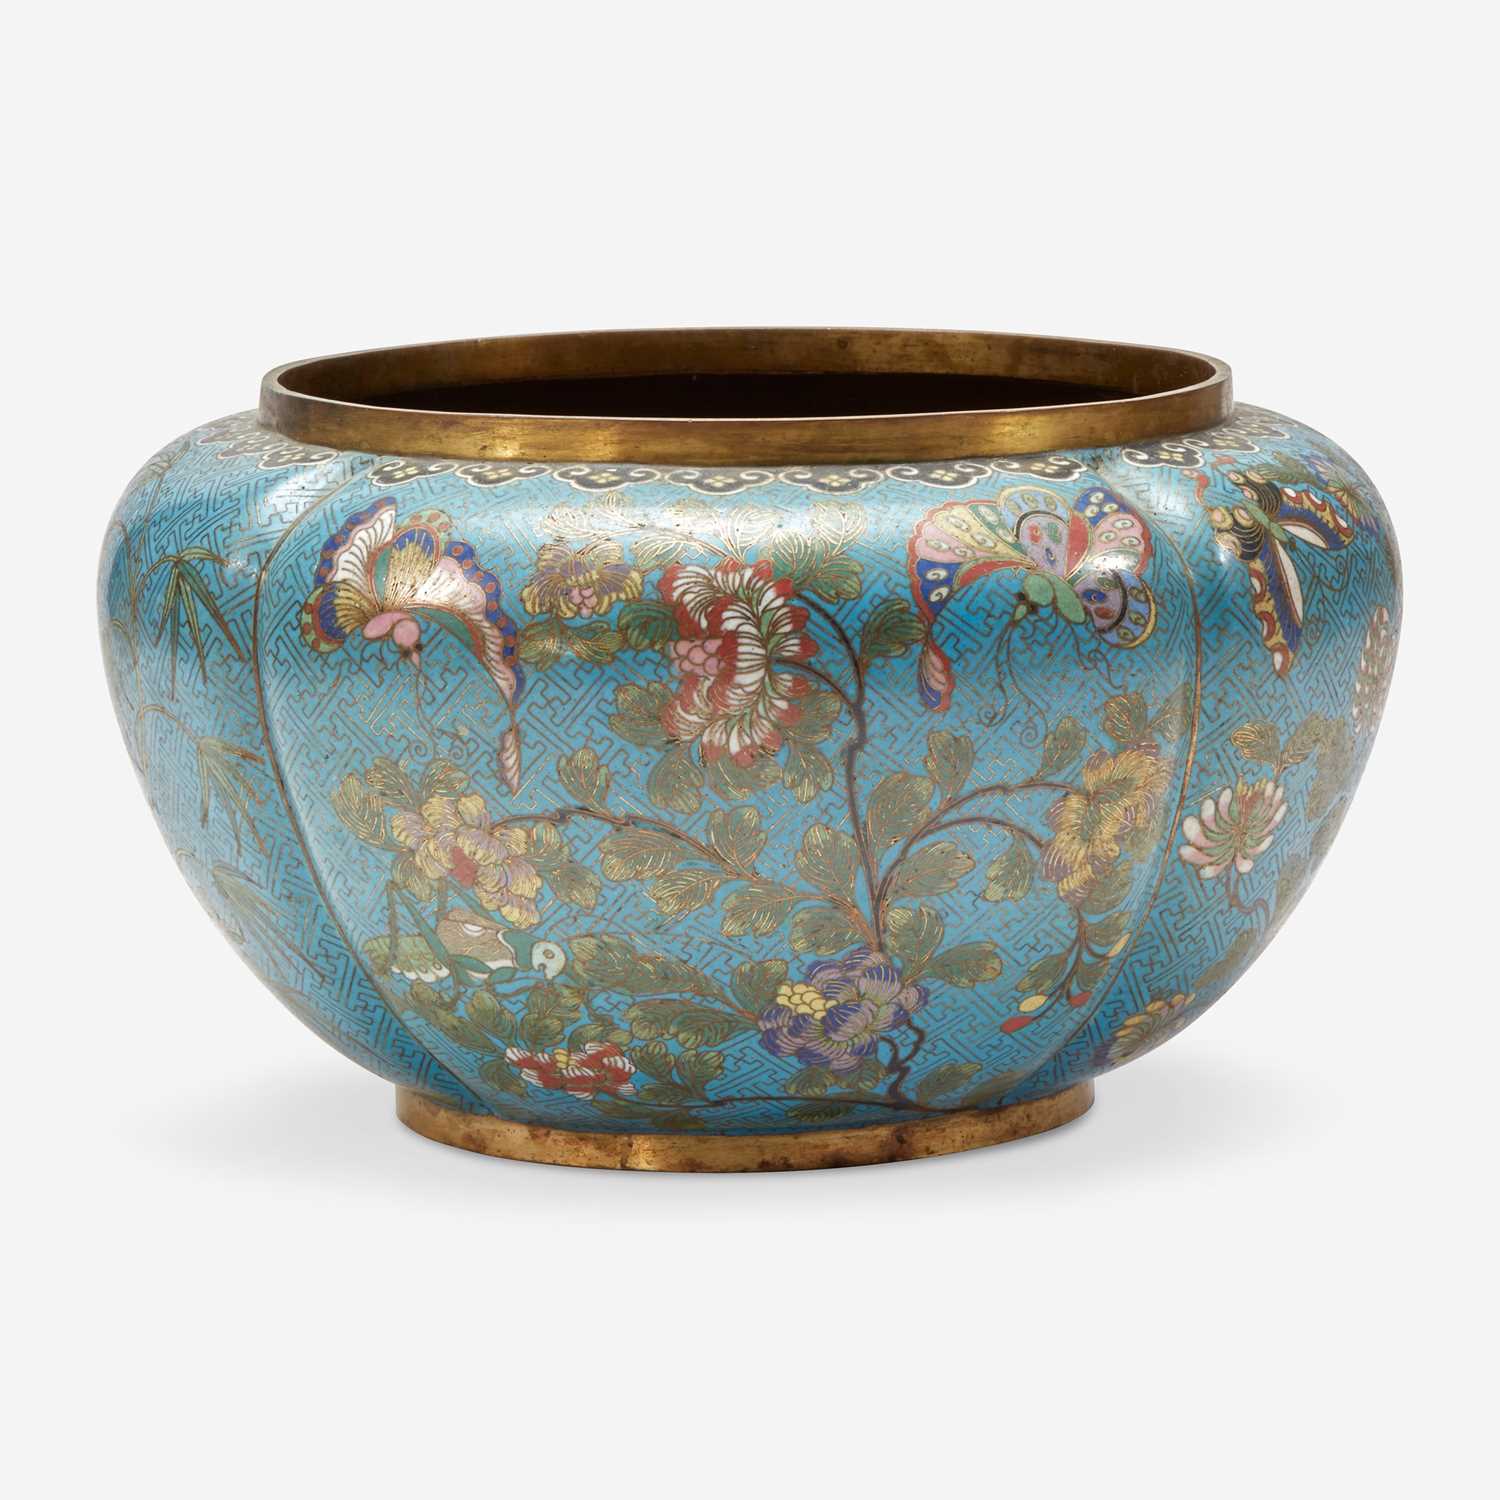 Lot 59 - A Chinese turquoise ground lobed jardinière 铜胎松石绿地瓜棱盆